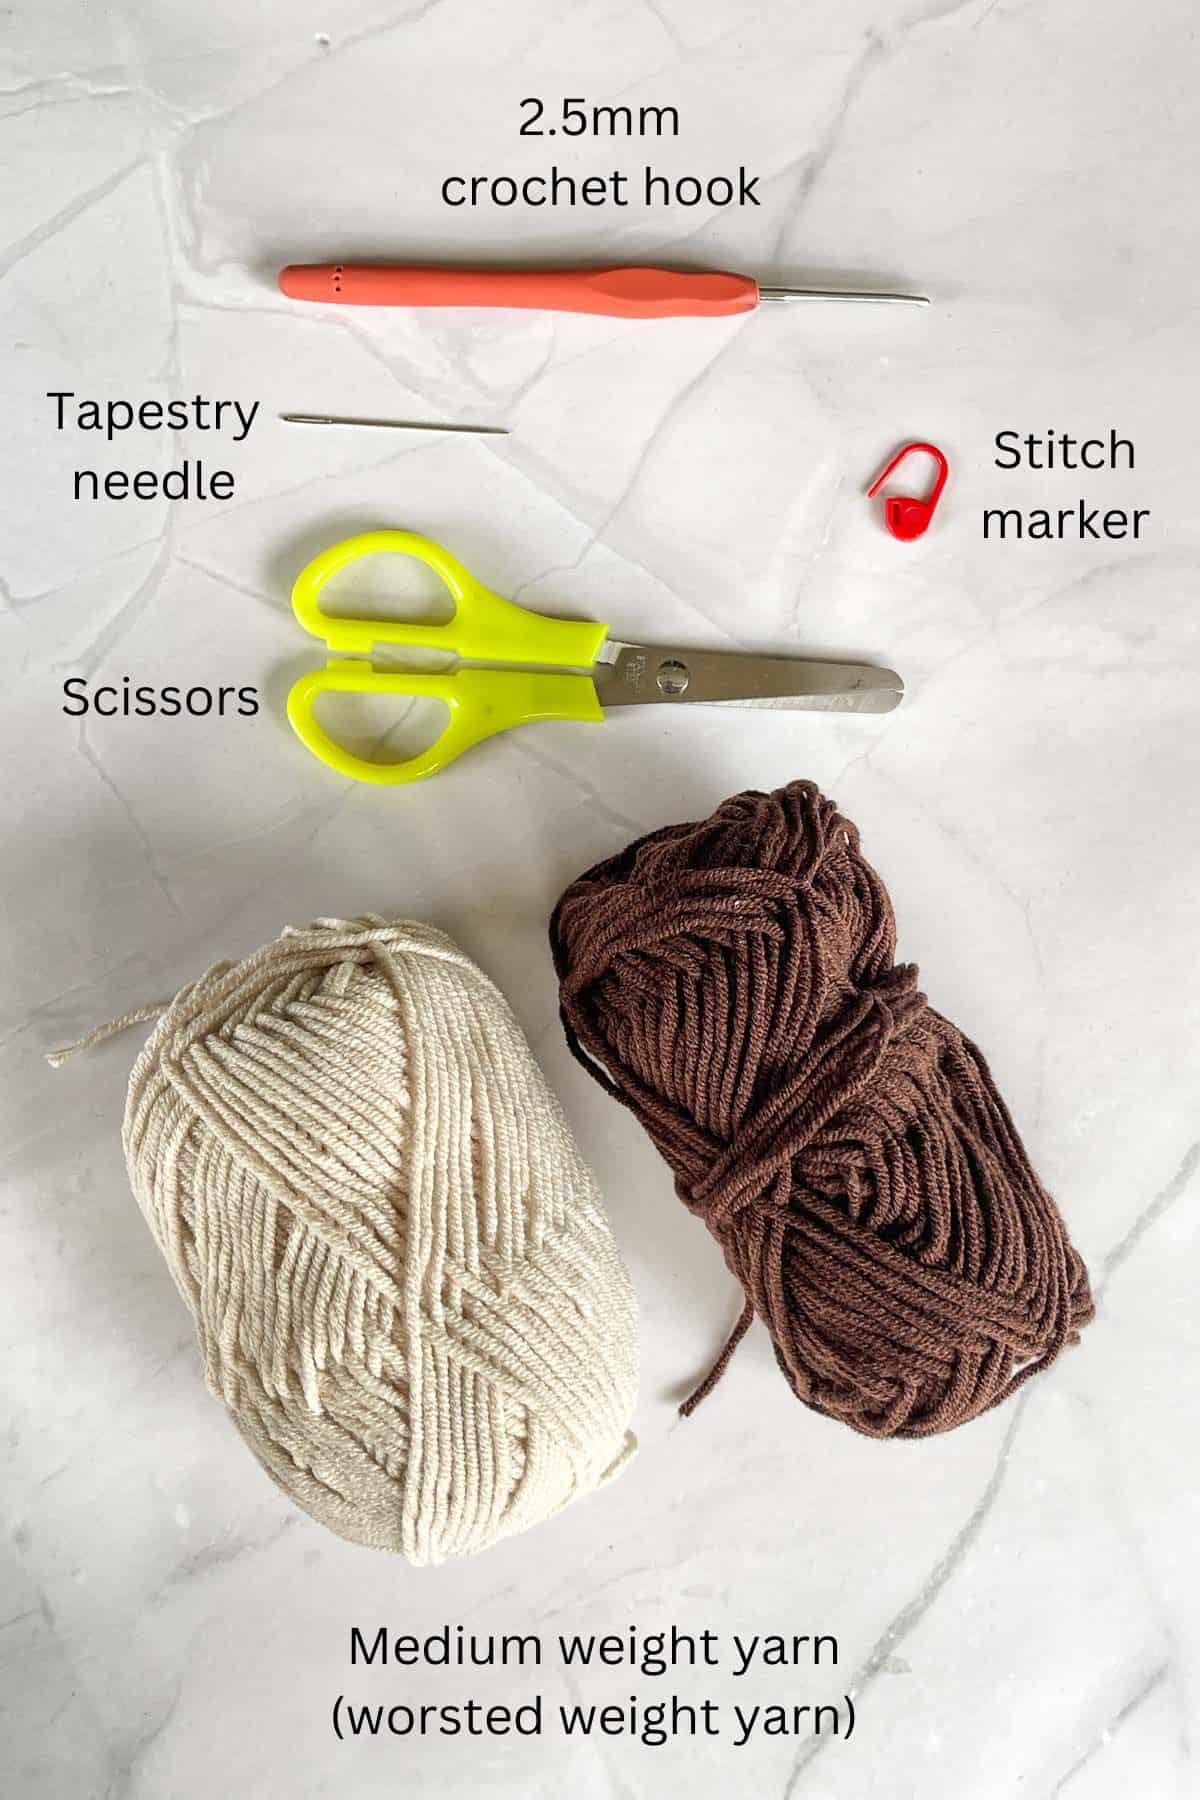 Beige and brown crochet yarn, crochet hook, tapestry needle, stitch marker and scissors.